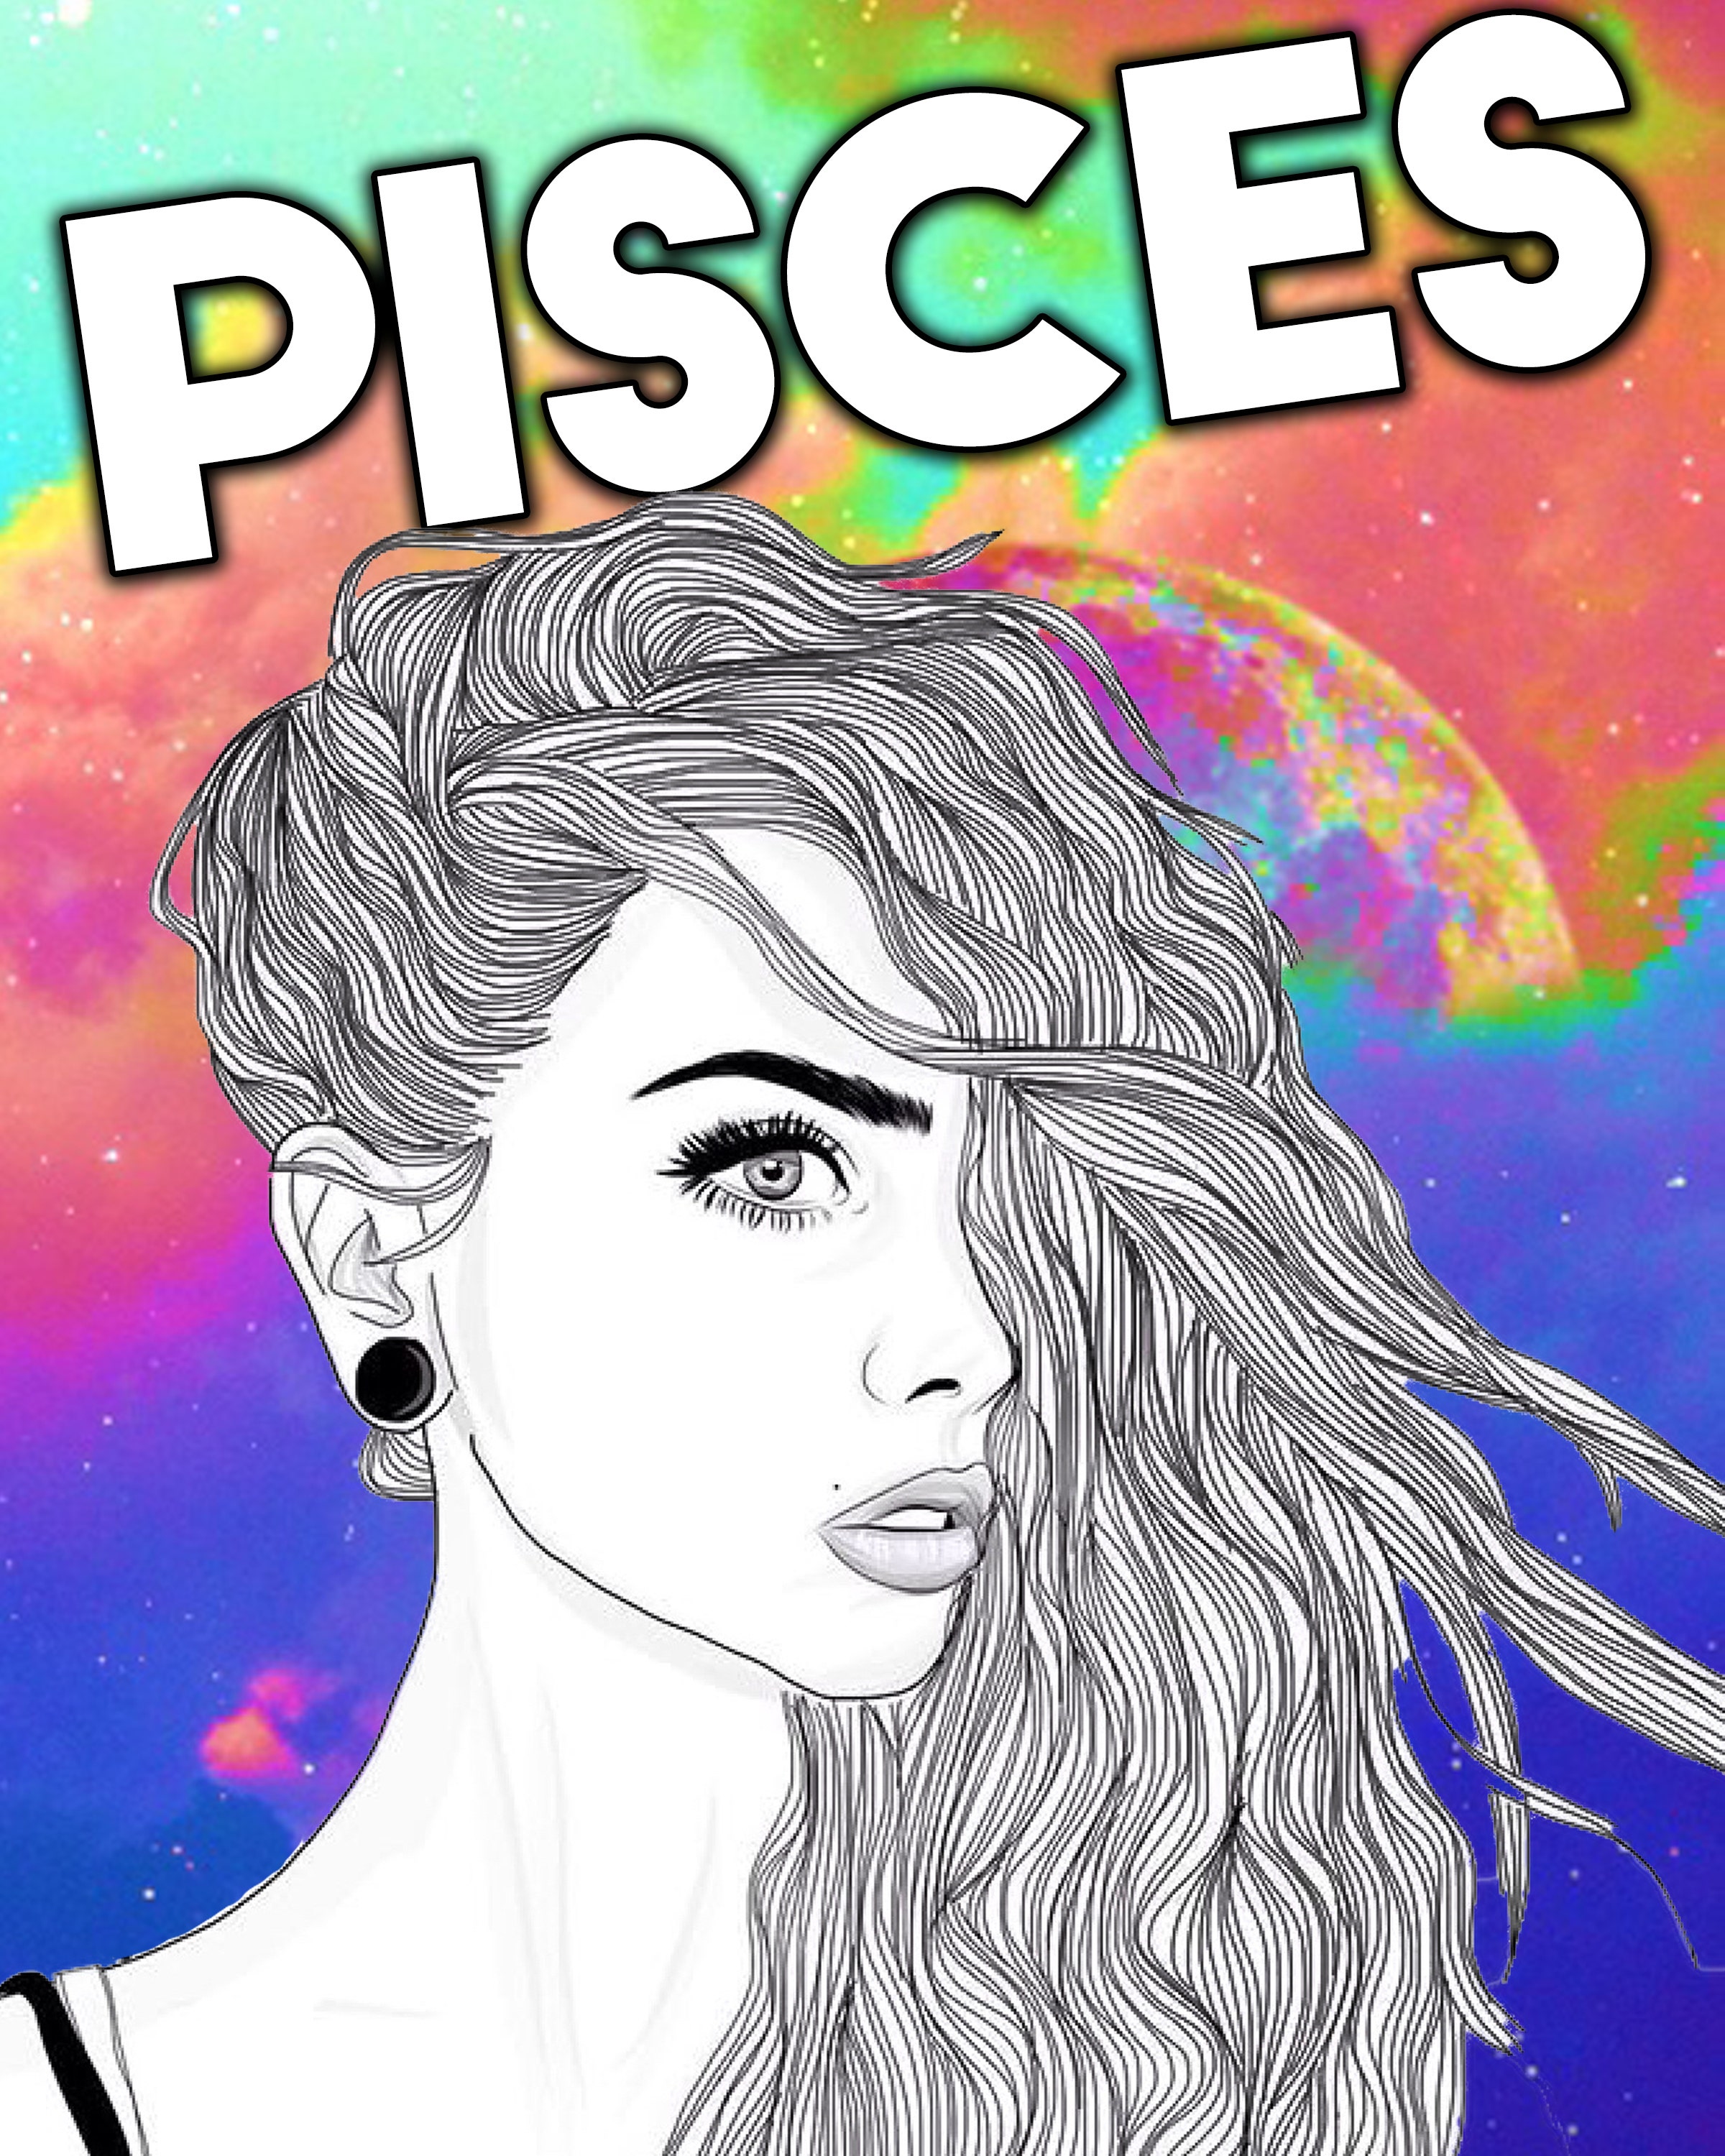 Pisces zodiac sign why he wants you back